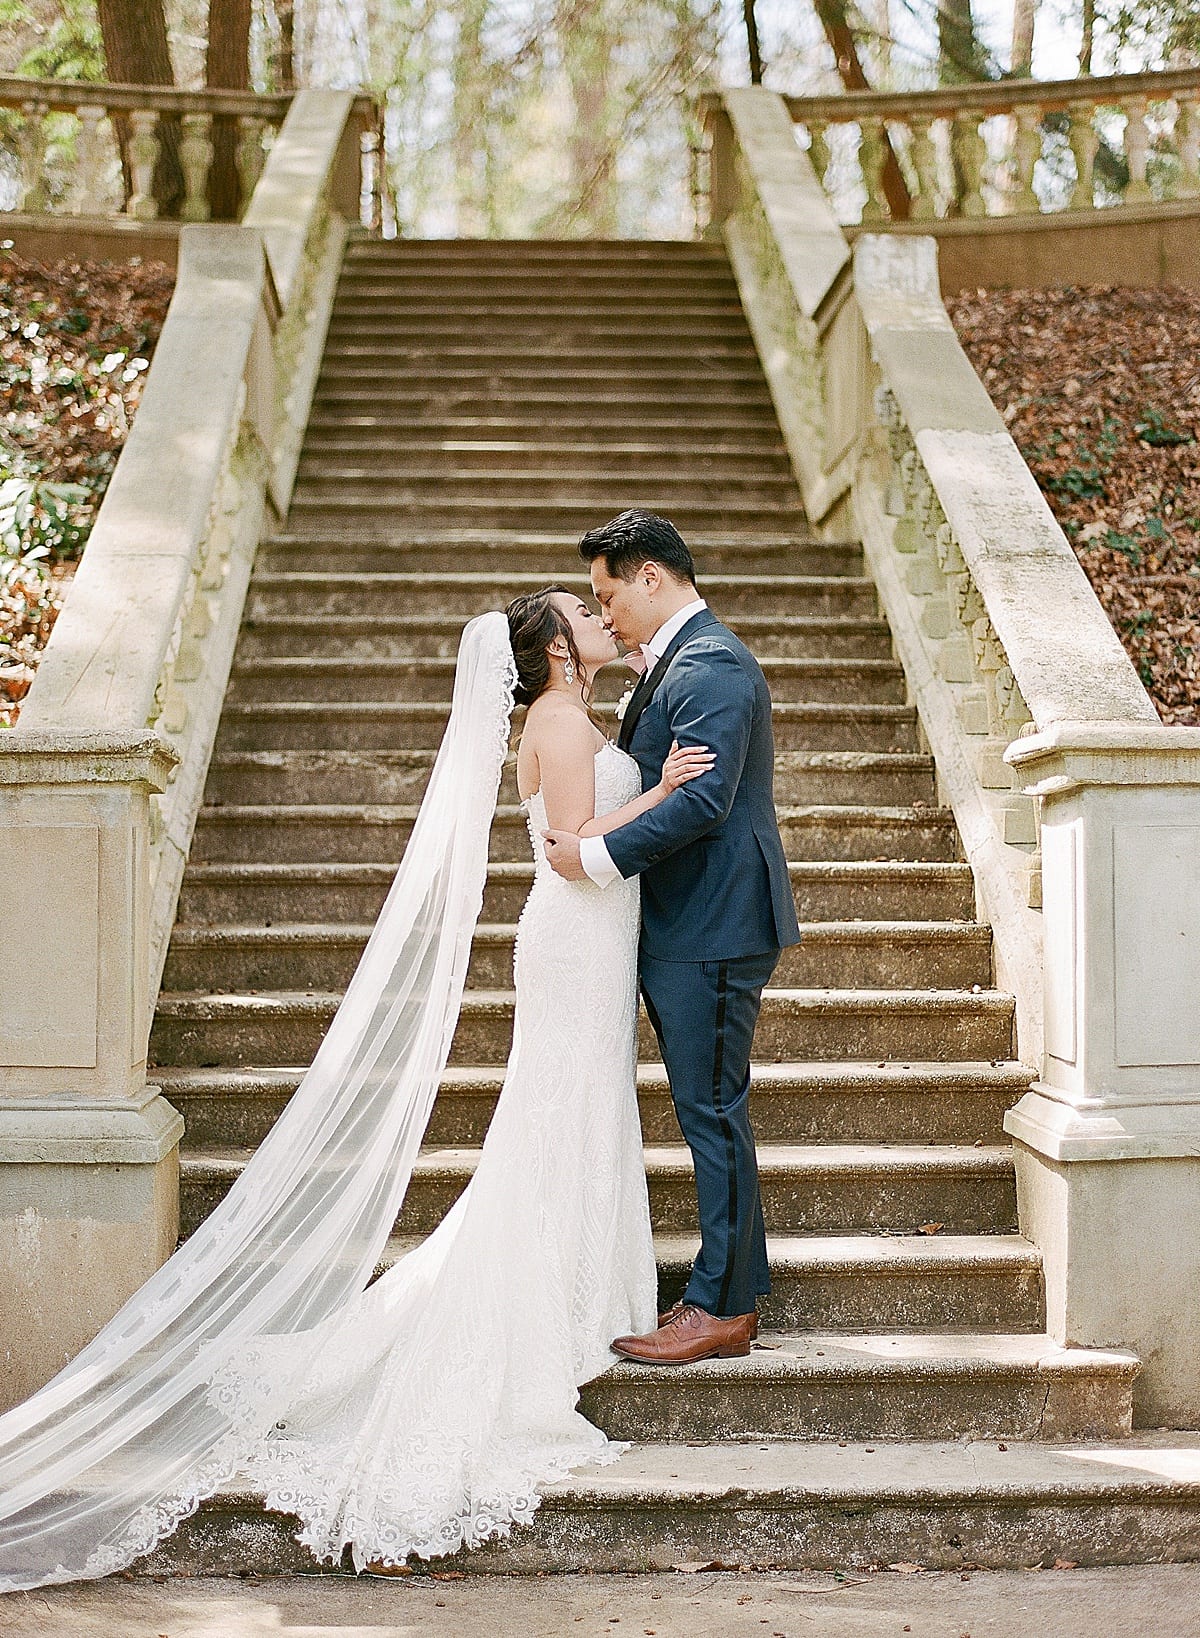 Cator Woolford Gardens Bride and Groom On Stairs Photo